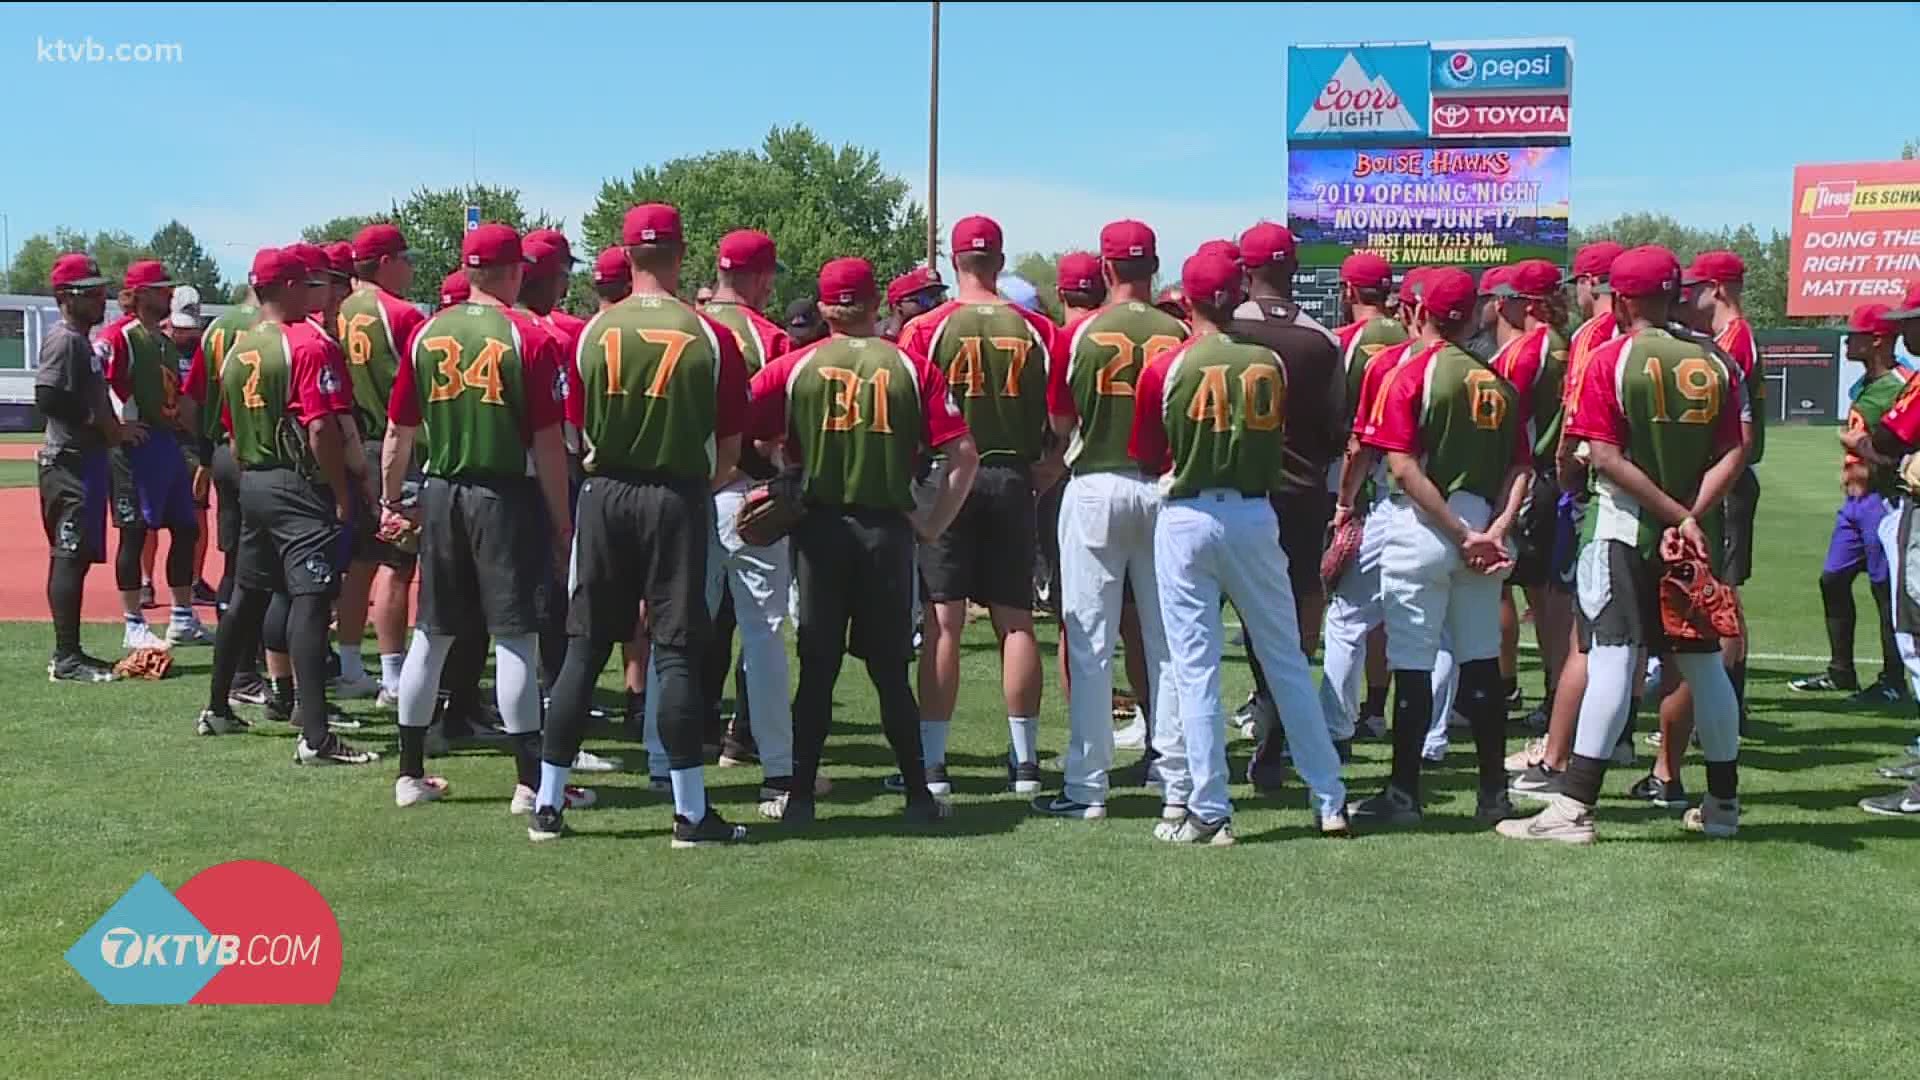 The Boise Hawks announced that the team will hold a two-day tryout camp for possible players at the end of April.